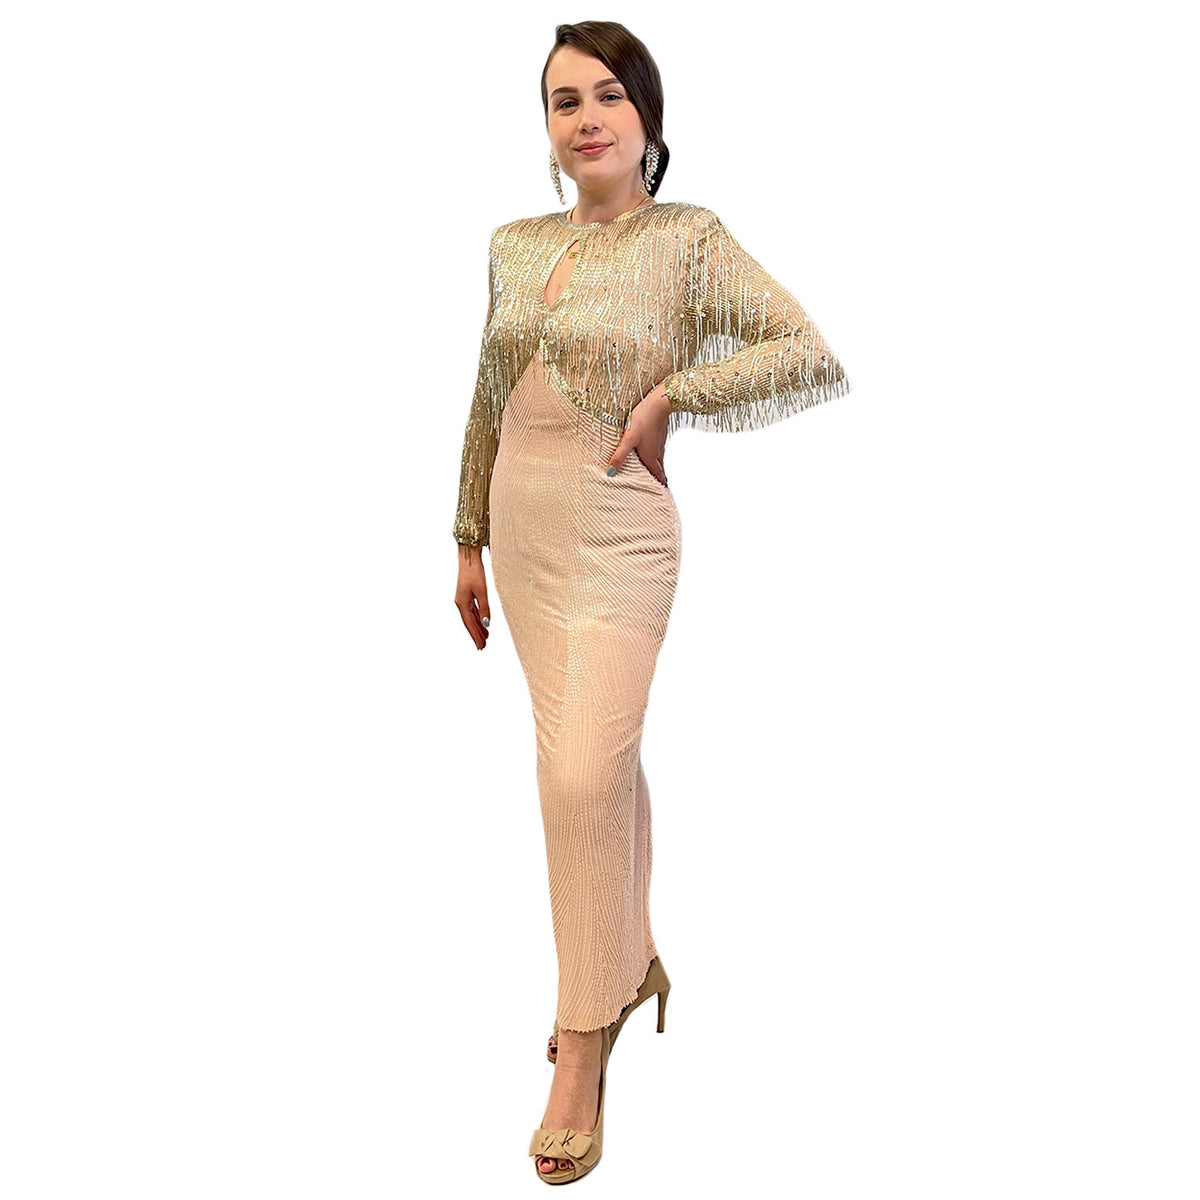 1920s Long Peach and Golden Dress Adult Costume